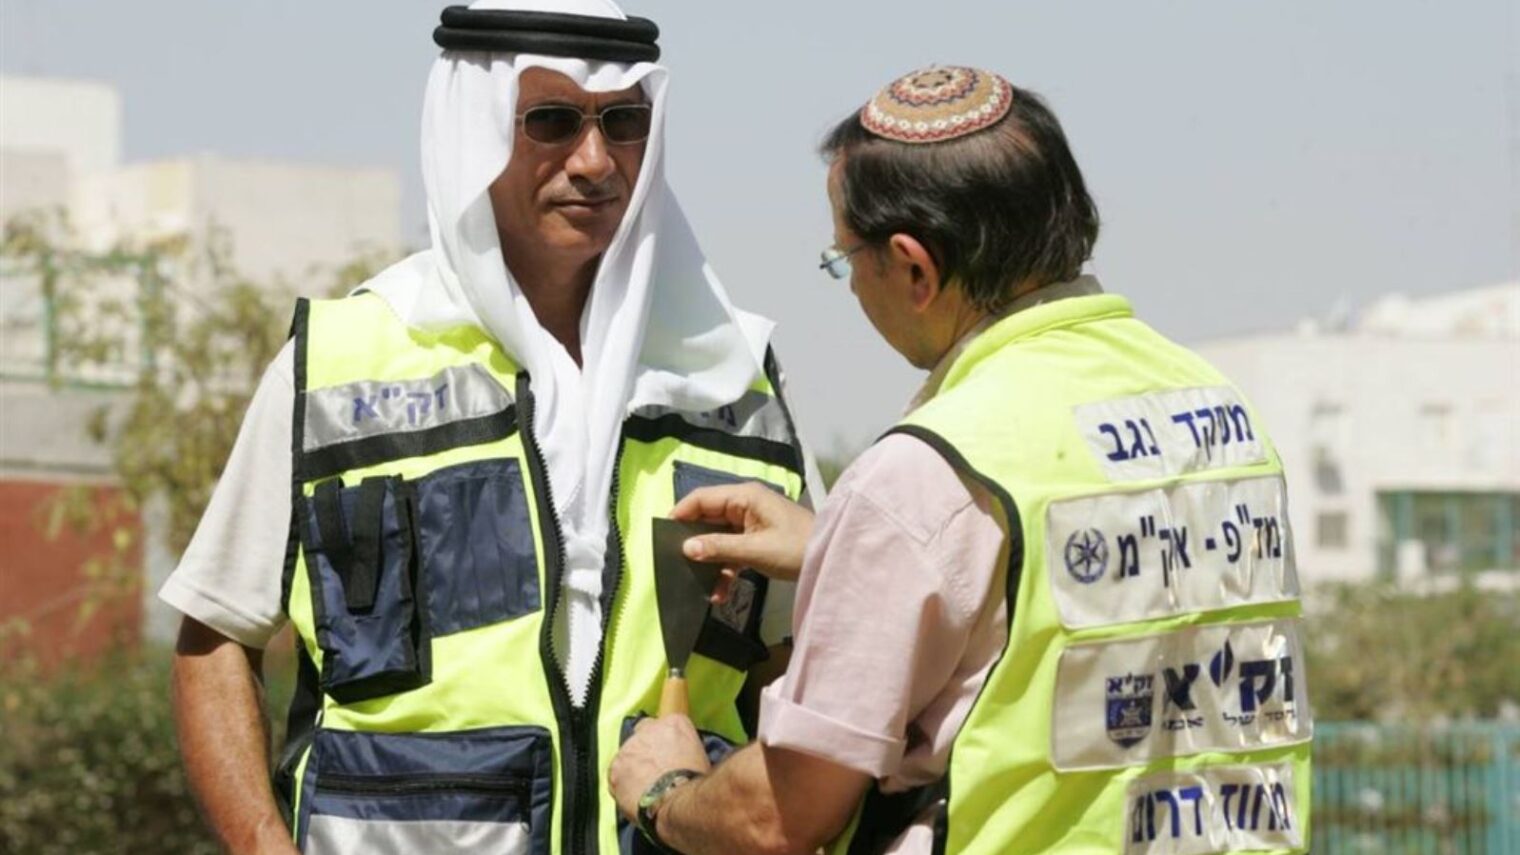 Arab and Jewish ZAKA volunteers in the Negev prepare to rescue victims together. Photo: courtesy